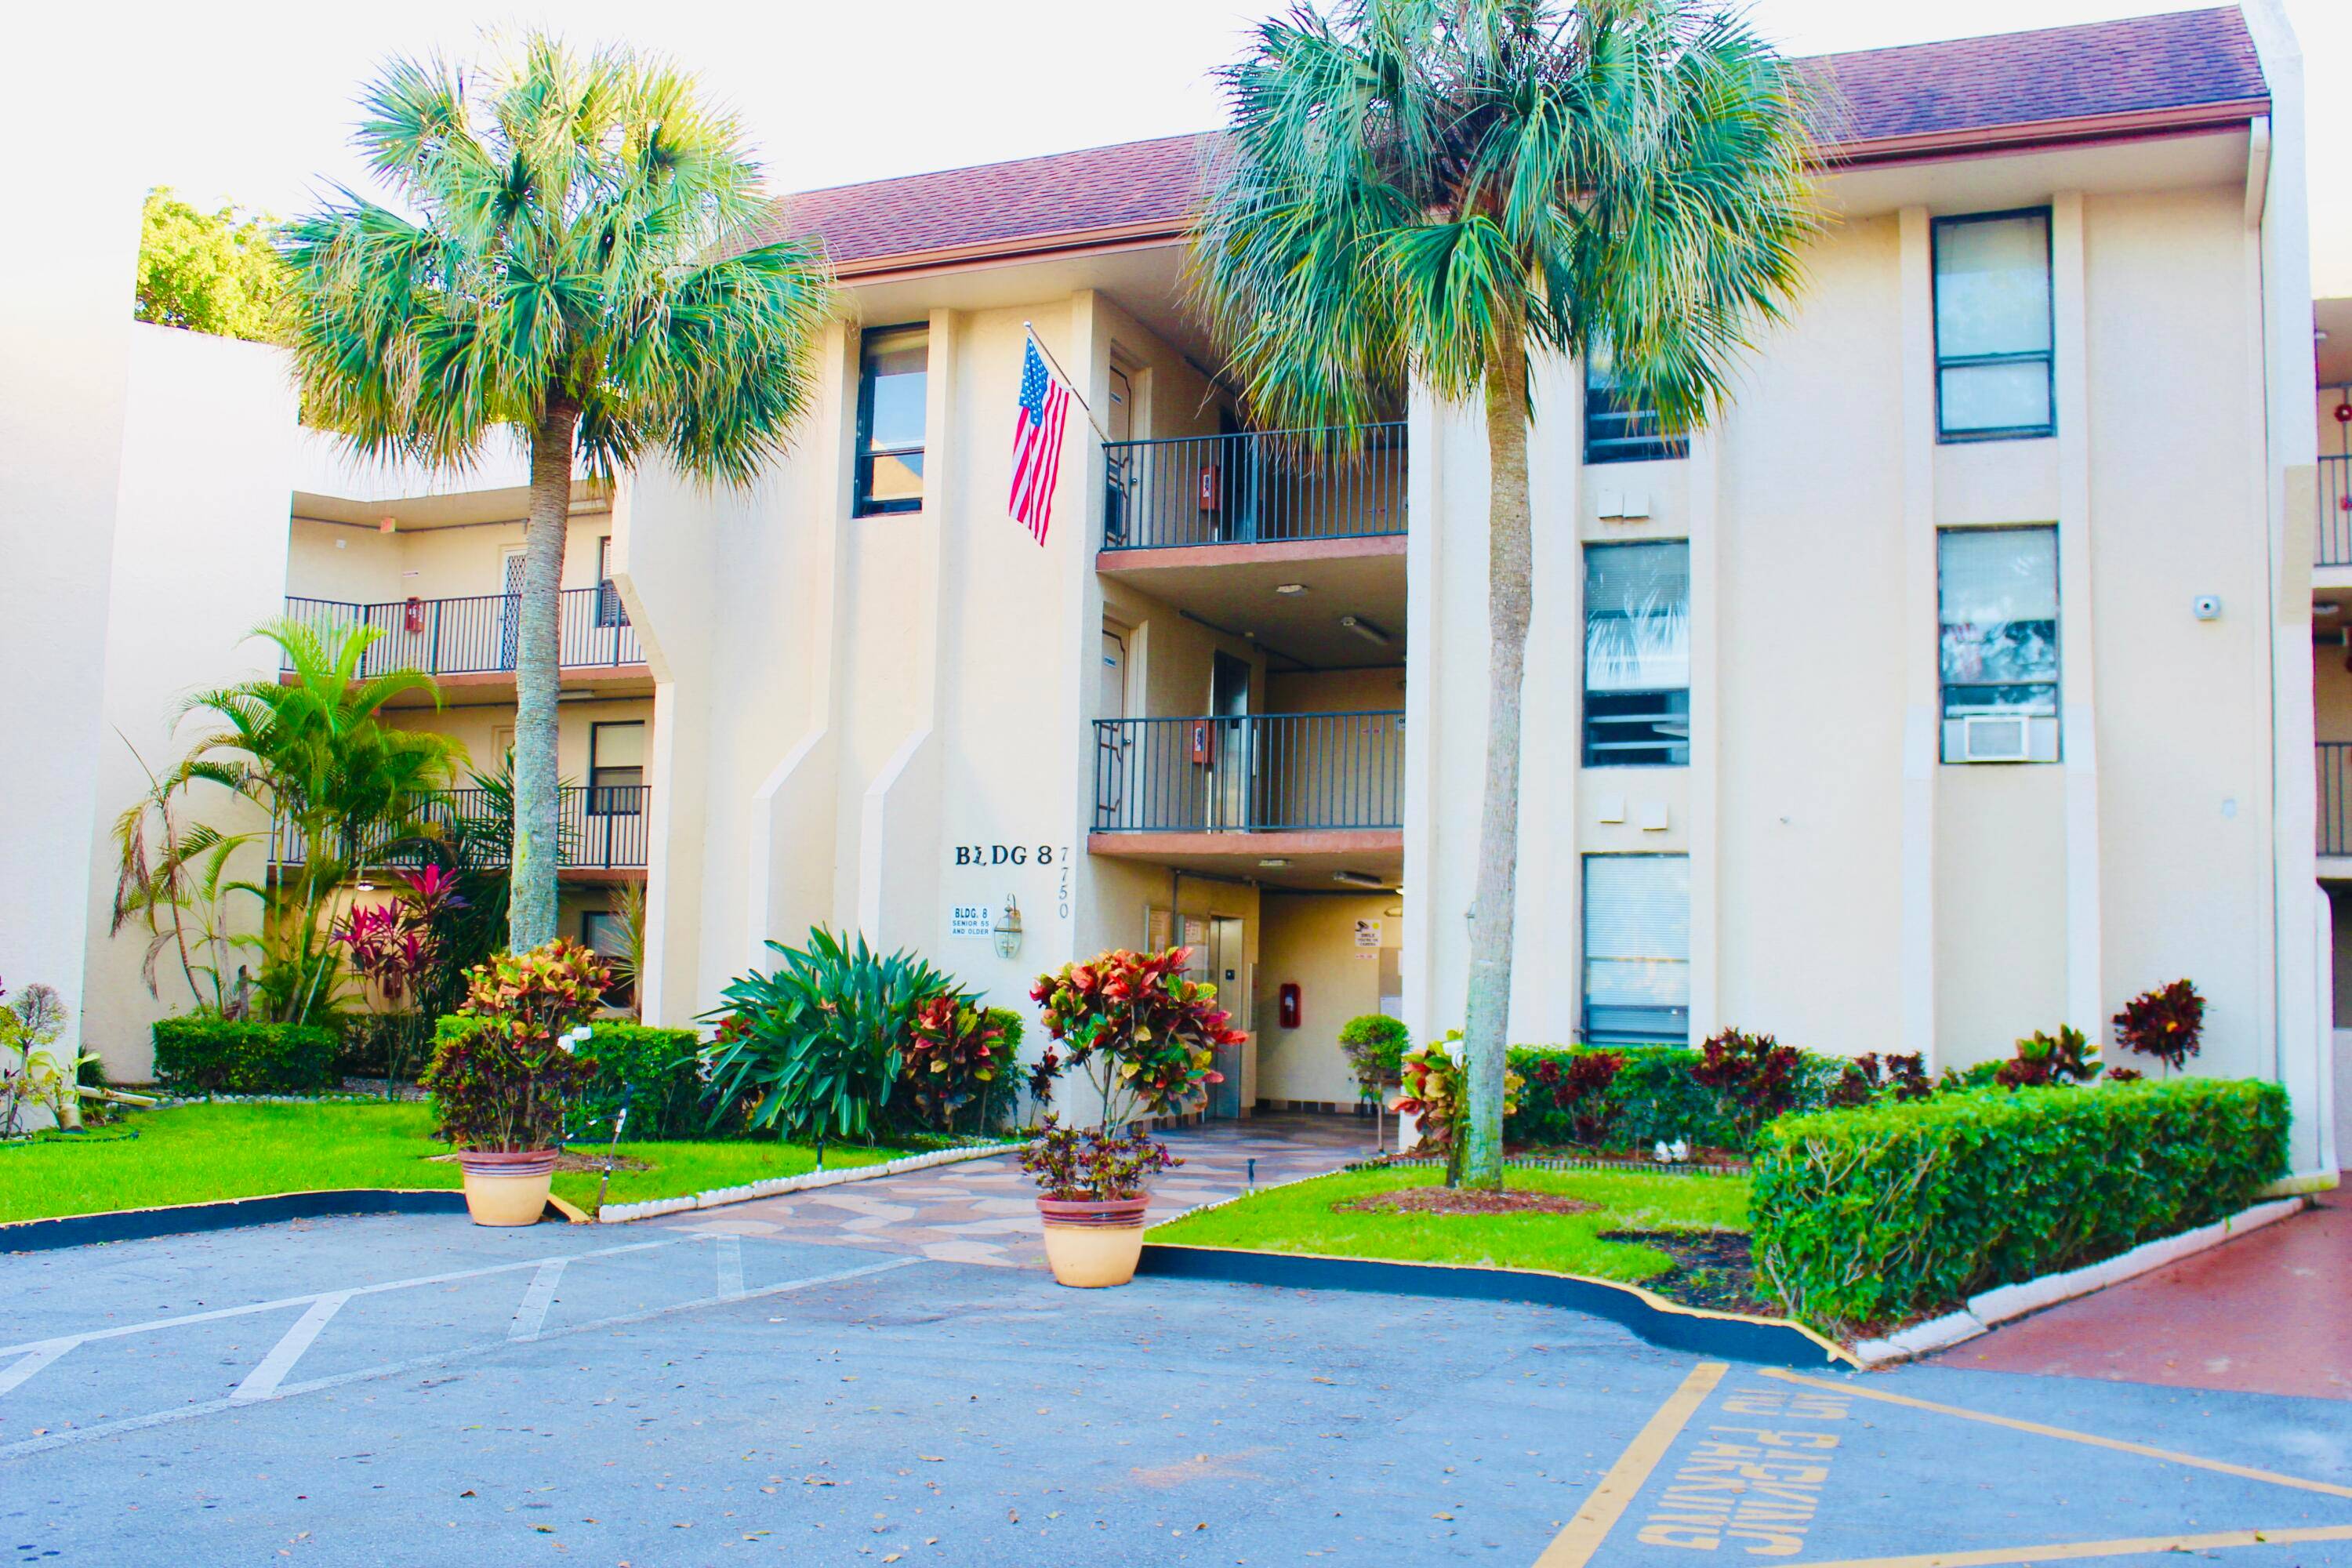 Welcome to your dream 55 and up living experience in Tamarac, Florida !